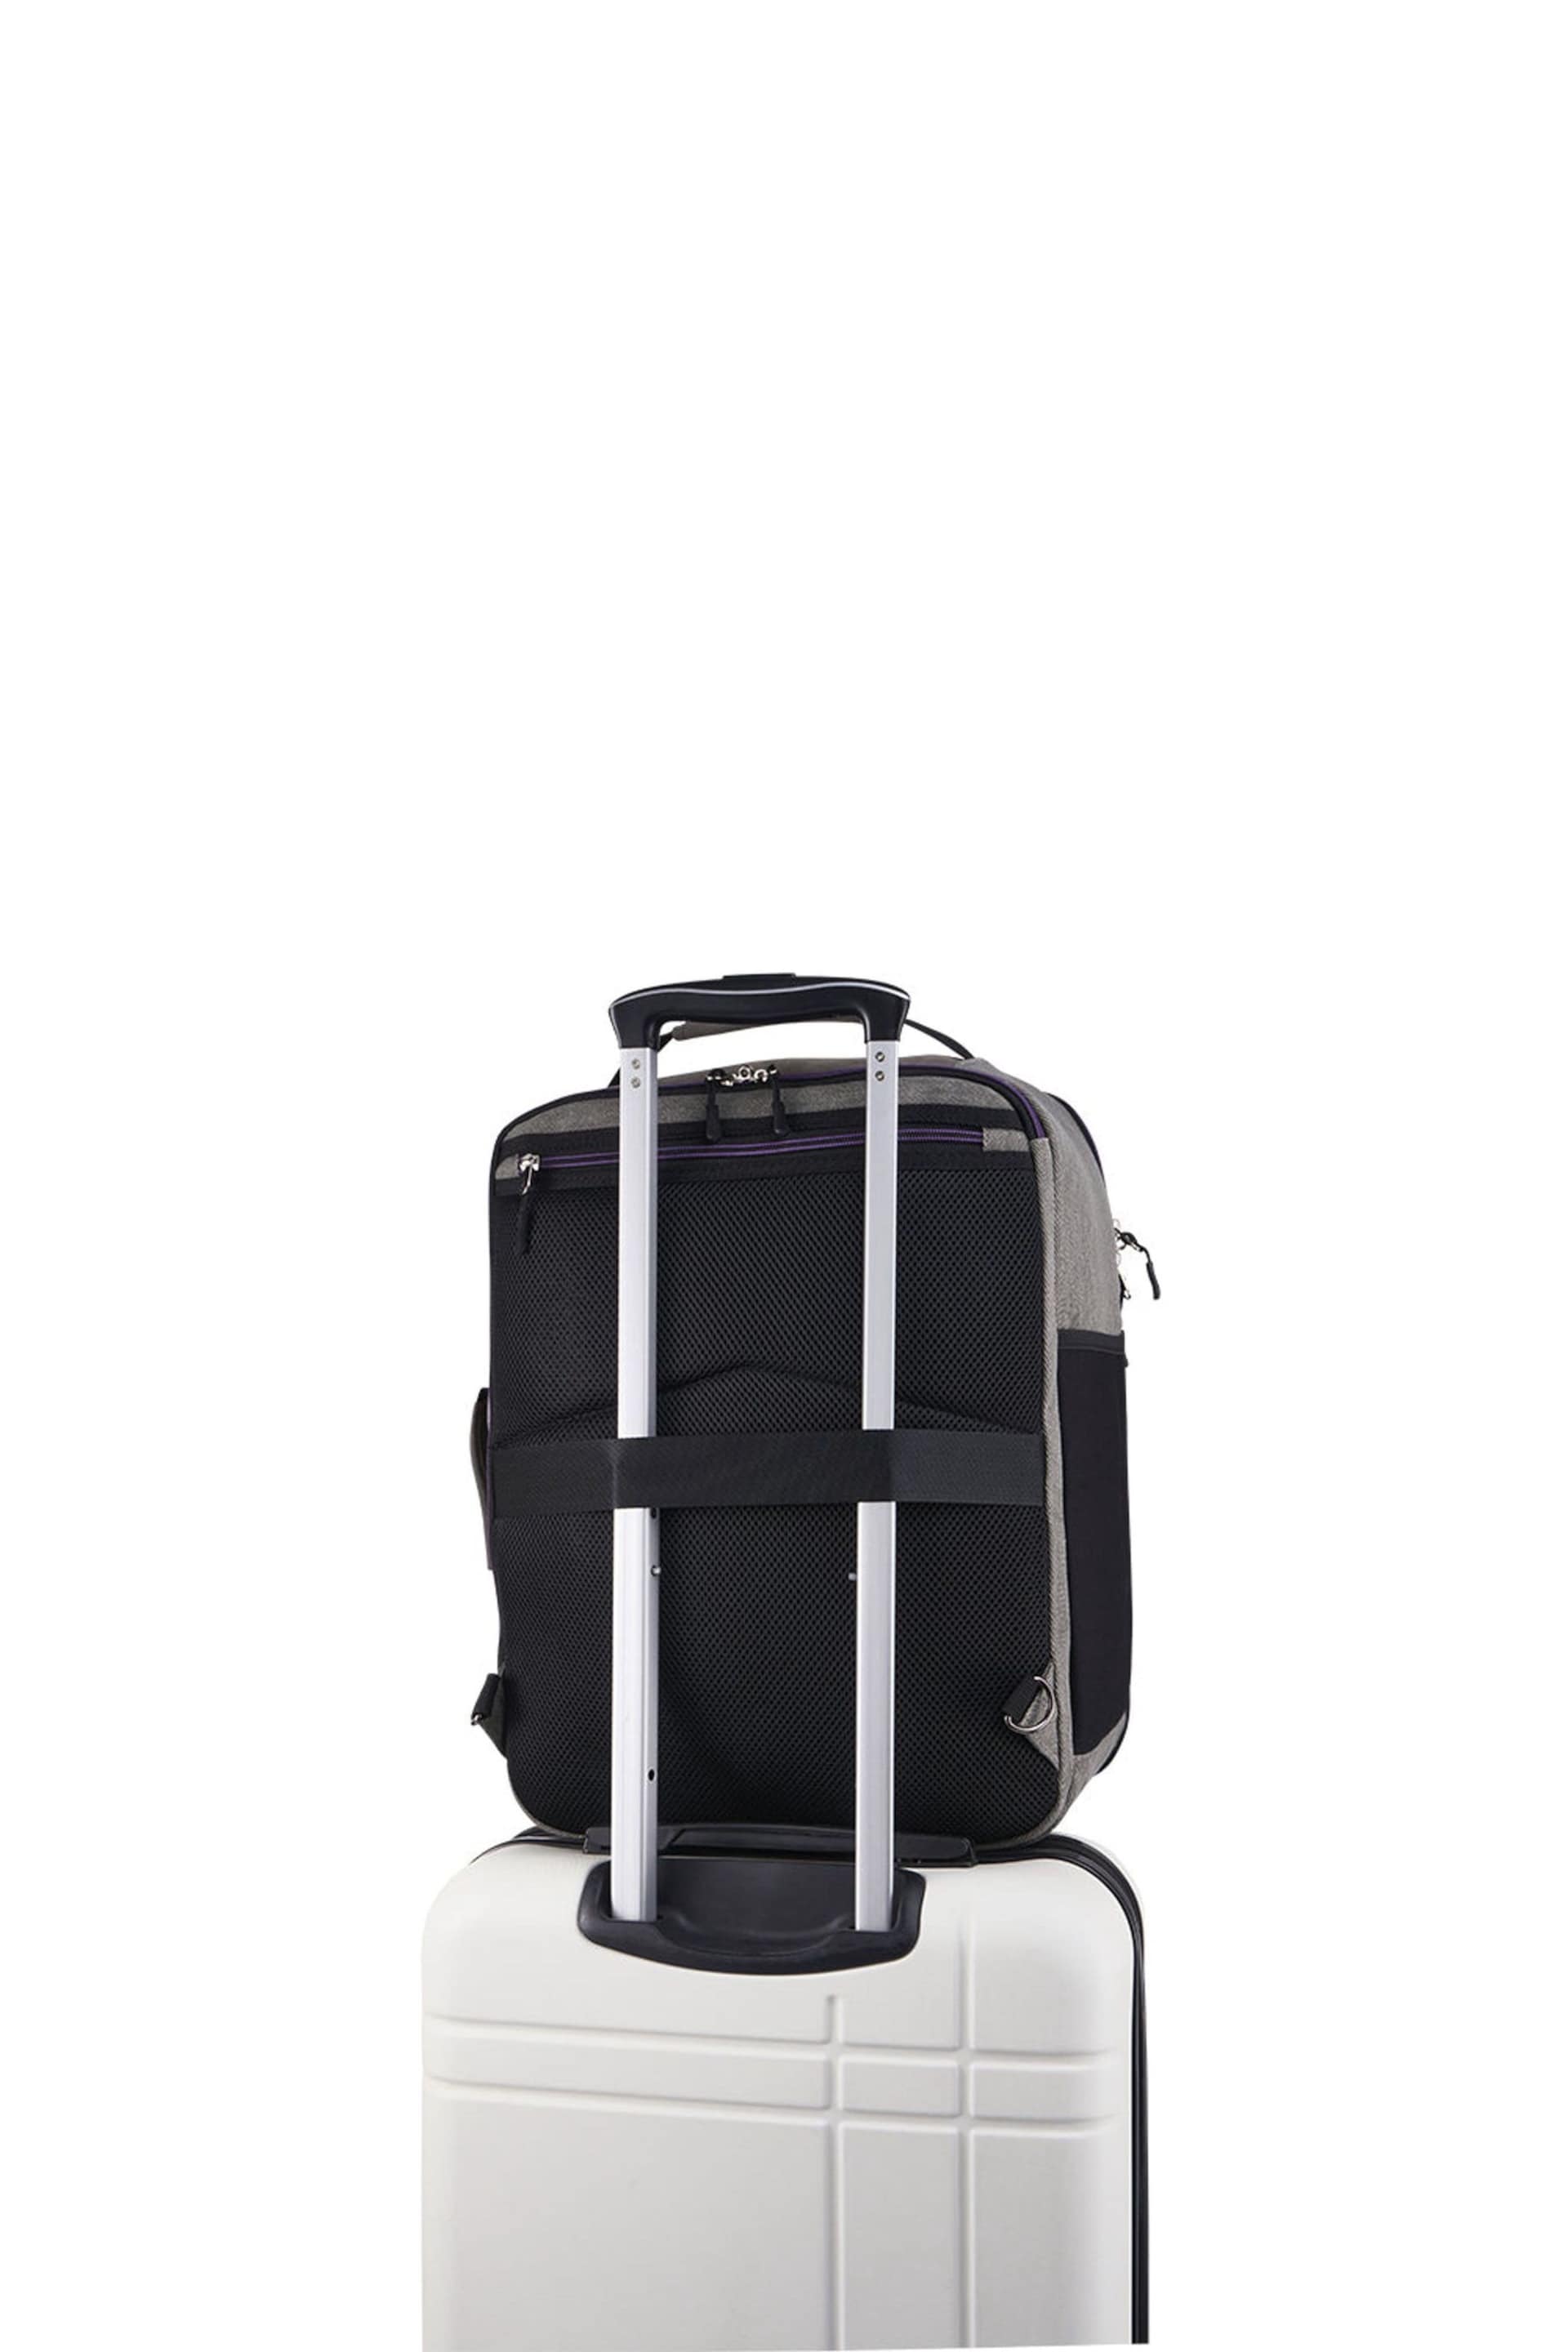 Cabin Max Underseat Backpack 30 Litre 45cm - Image 5 of 5